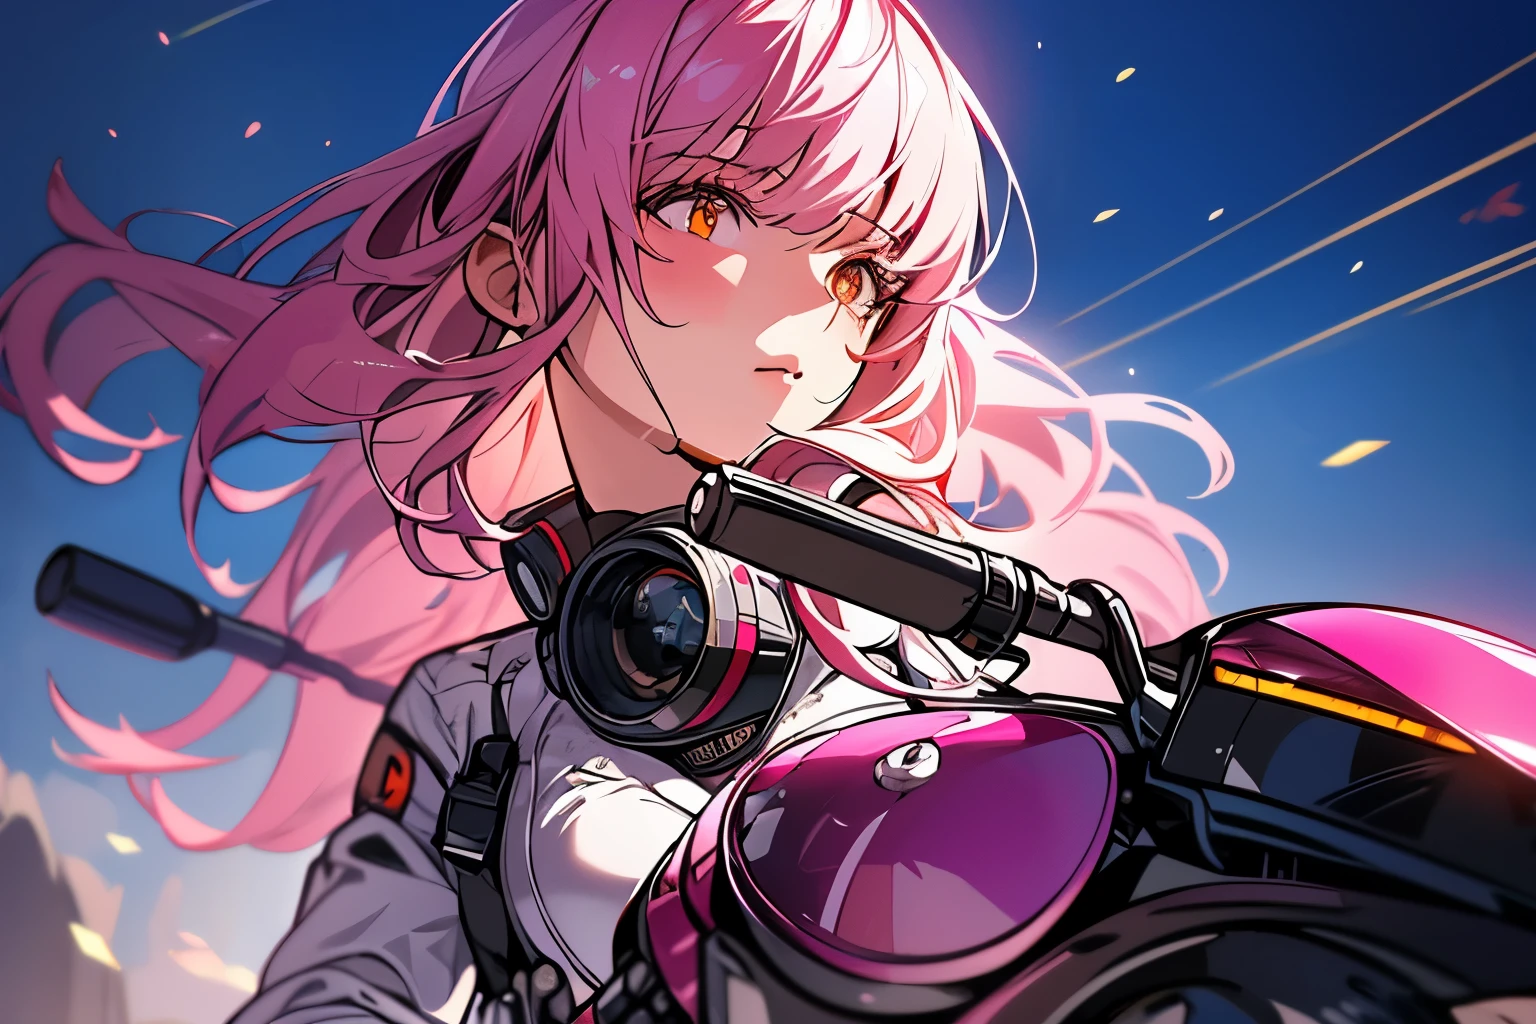 Highest image quality, outstanding details, ultra-high resolution, (realism: 1.4), the best illustration, favor details, highly condensed 1girl, with a delicate and beautiful face, wearing a pink mech, wearing a mecha helmet, holding a direction controller, riding on a motorcycle, the background is a high-tech lighting scene of the future city.